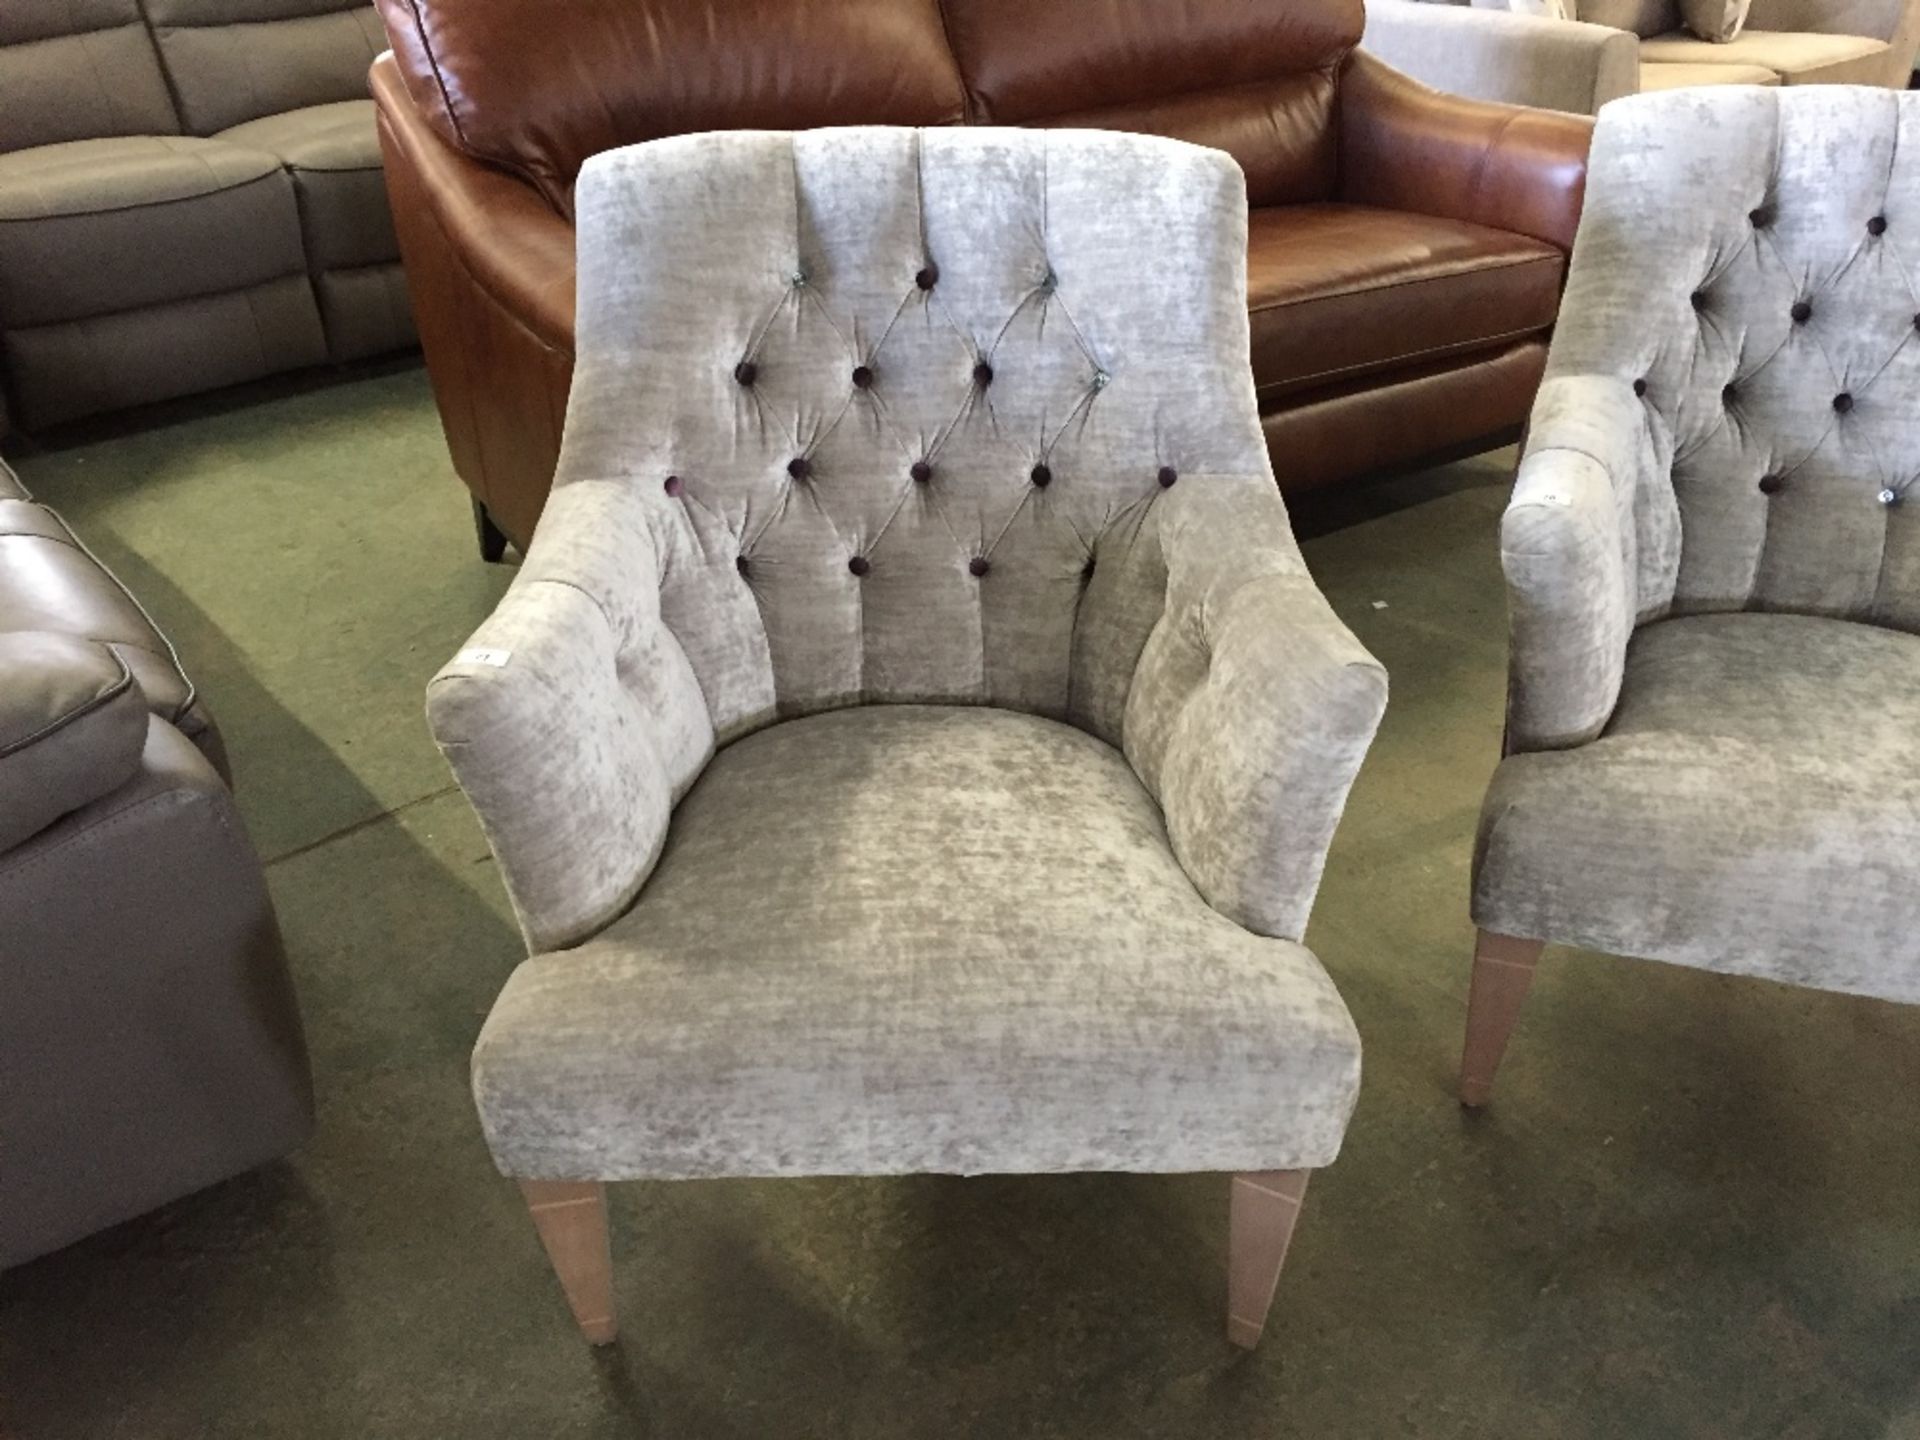 GREY AND PLUM ACCENT CHAIR (missing button covers)